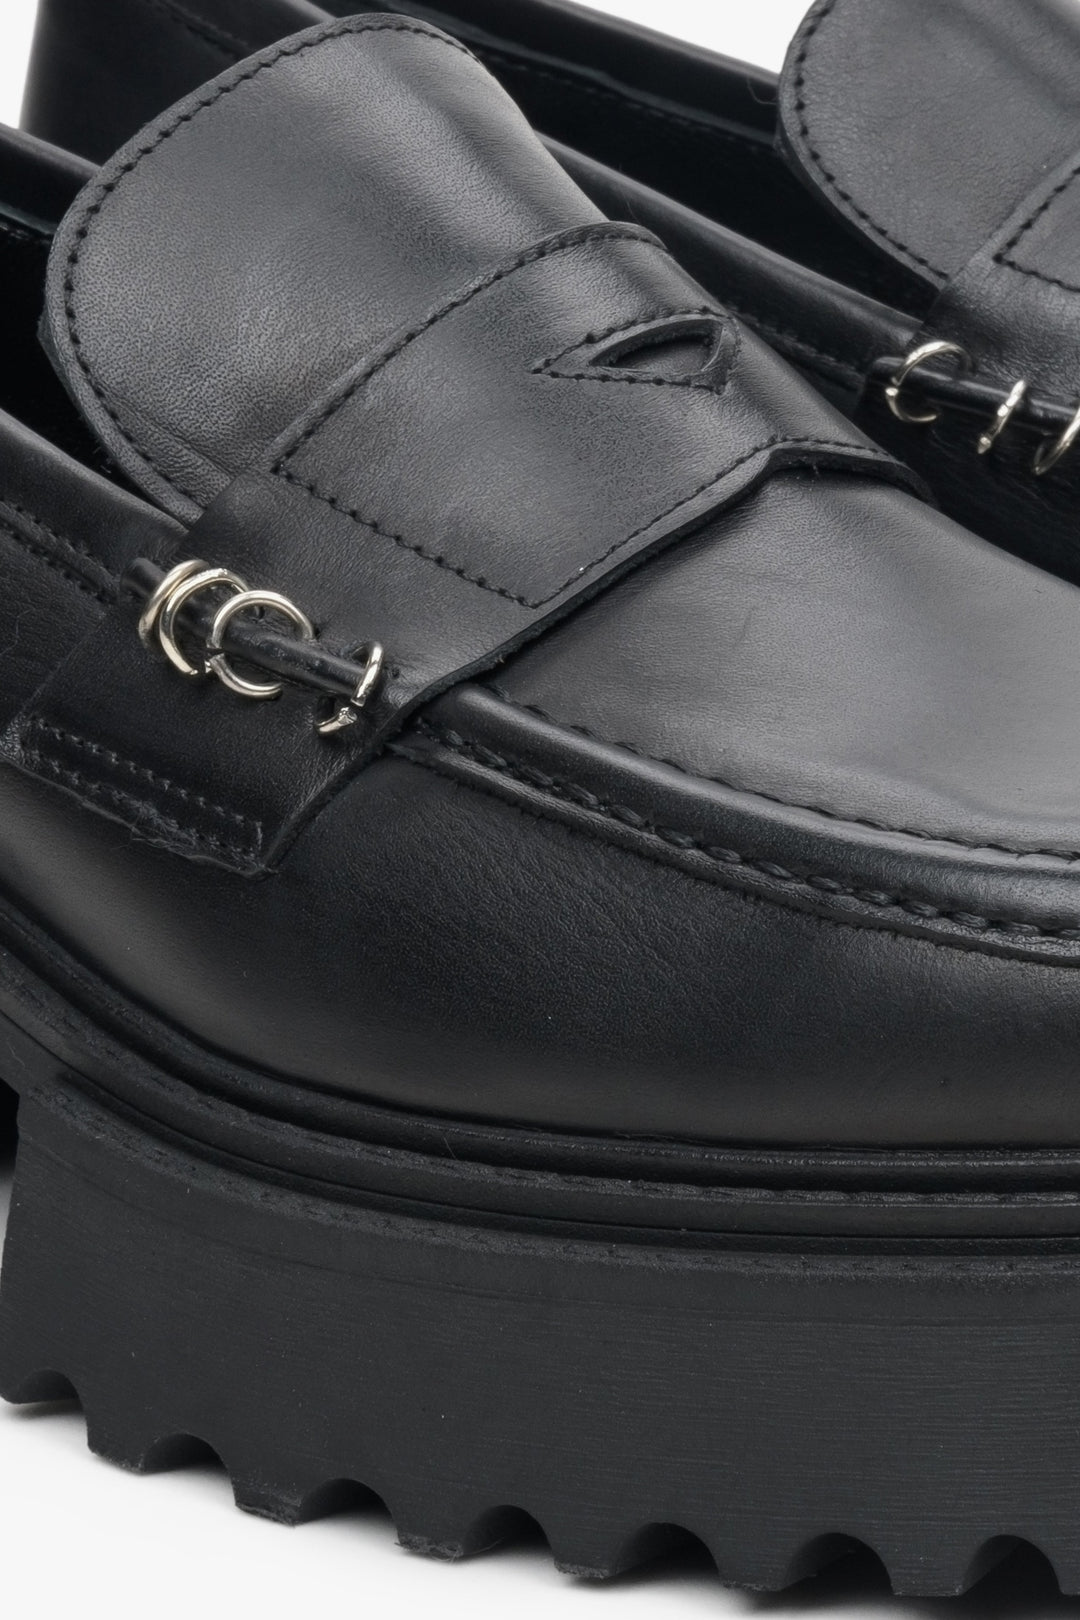 Women's leather moccasins on a thick black sole - close-up on the detail.